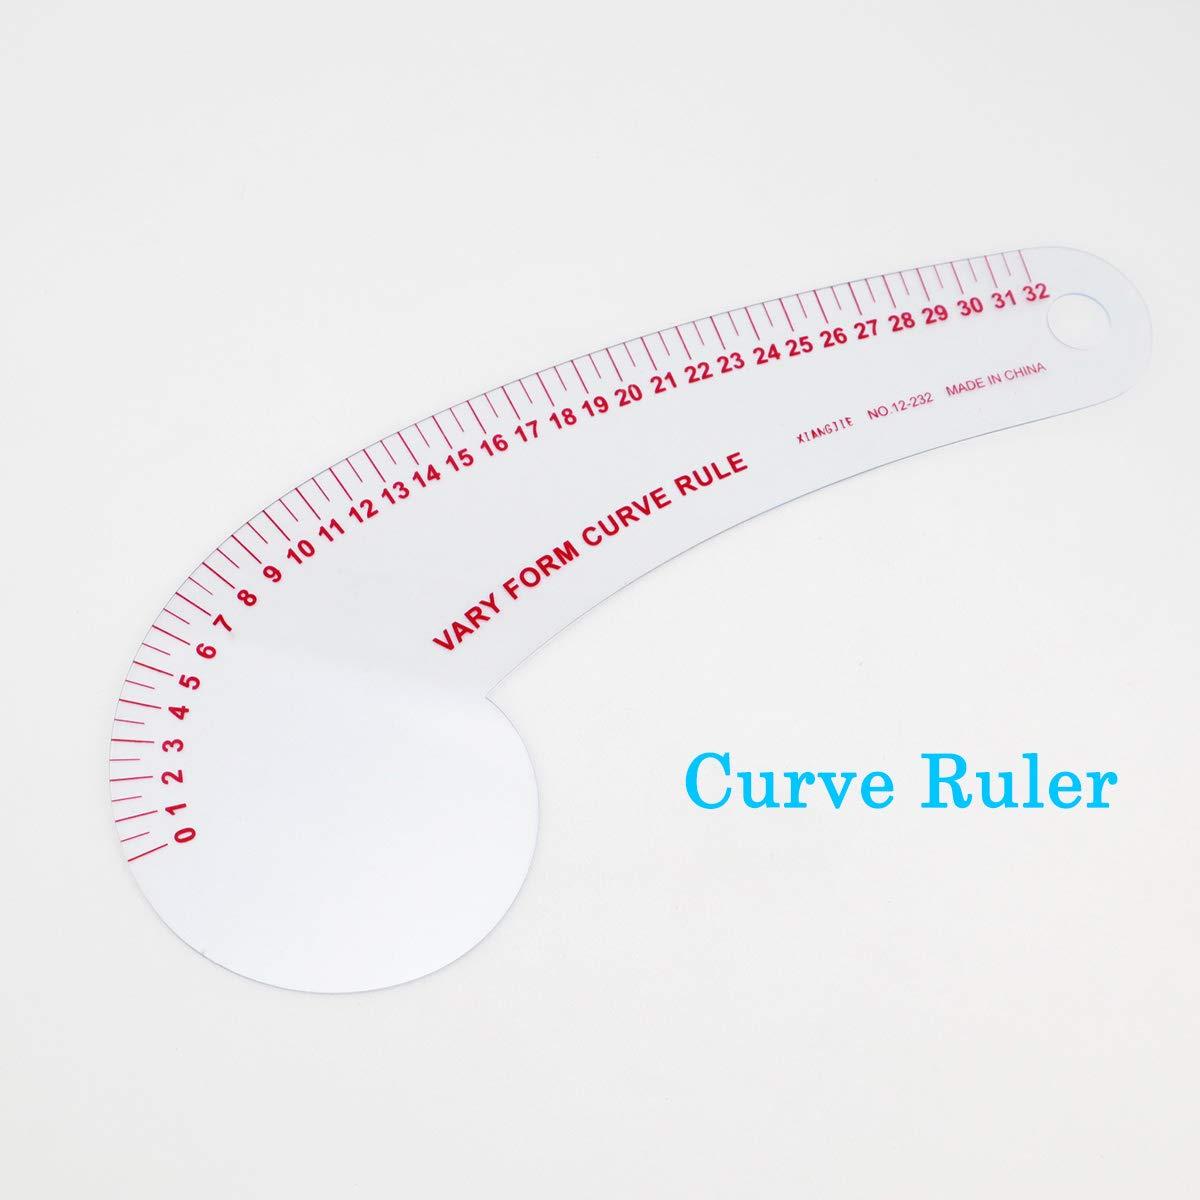 hip curve drawing